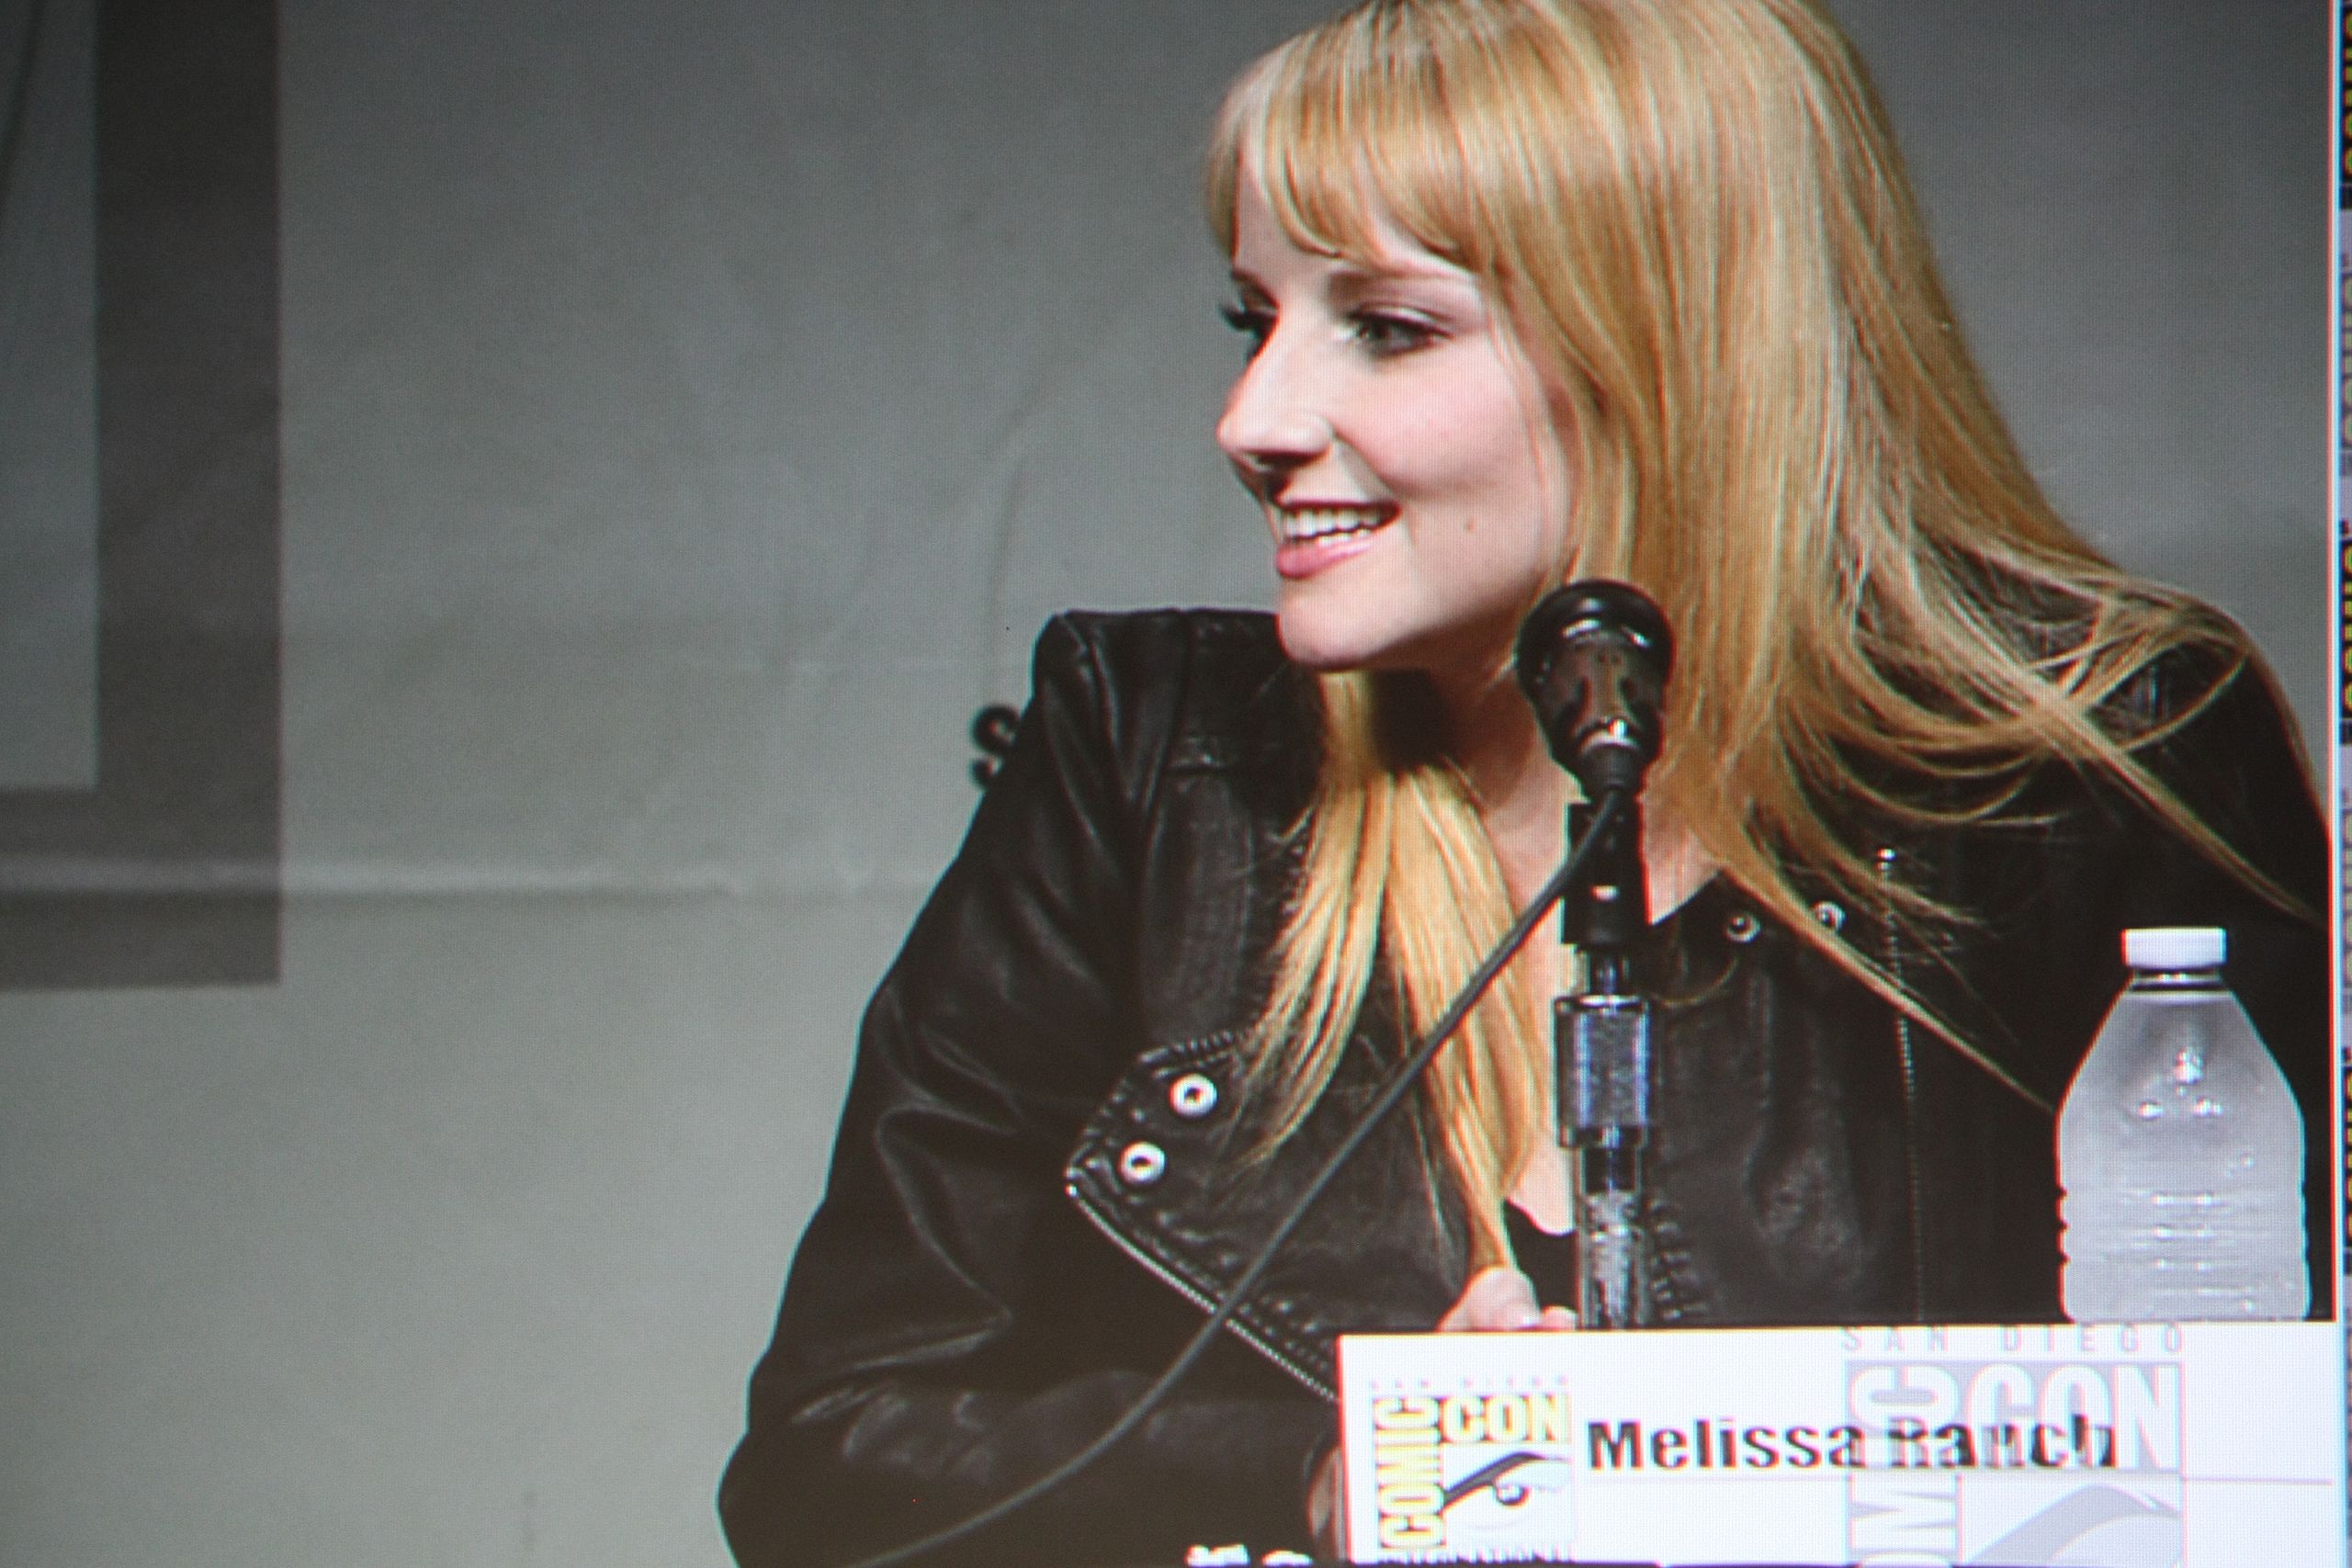 christy garland recommends F That Melissa Rauch